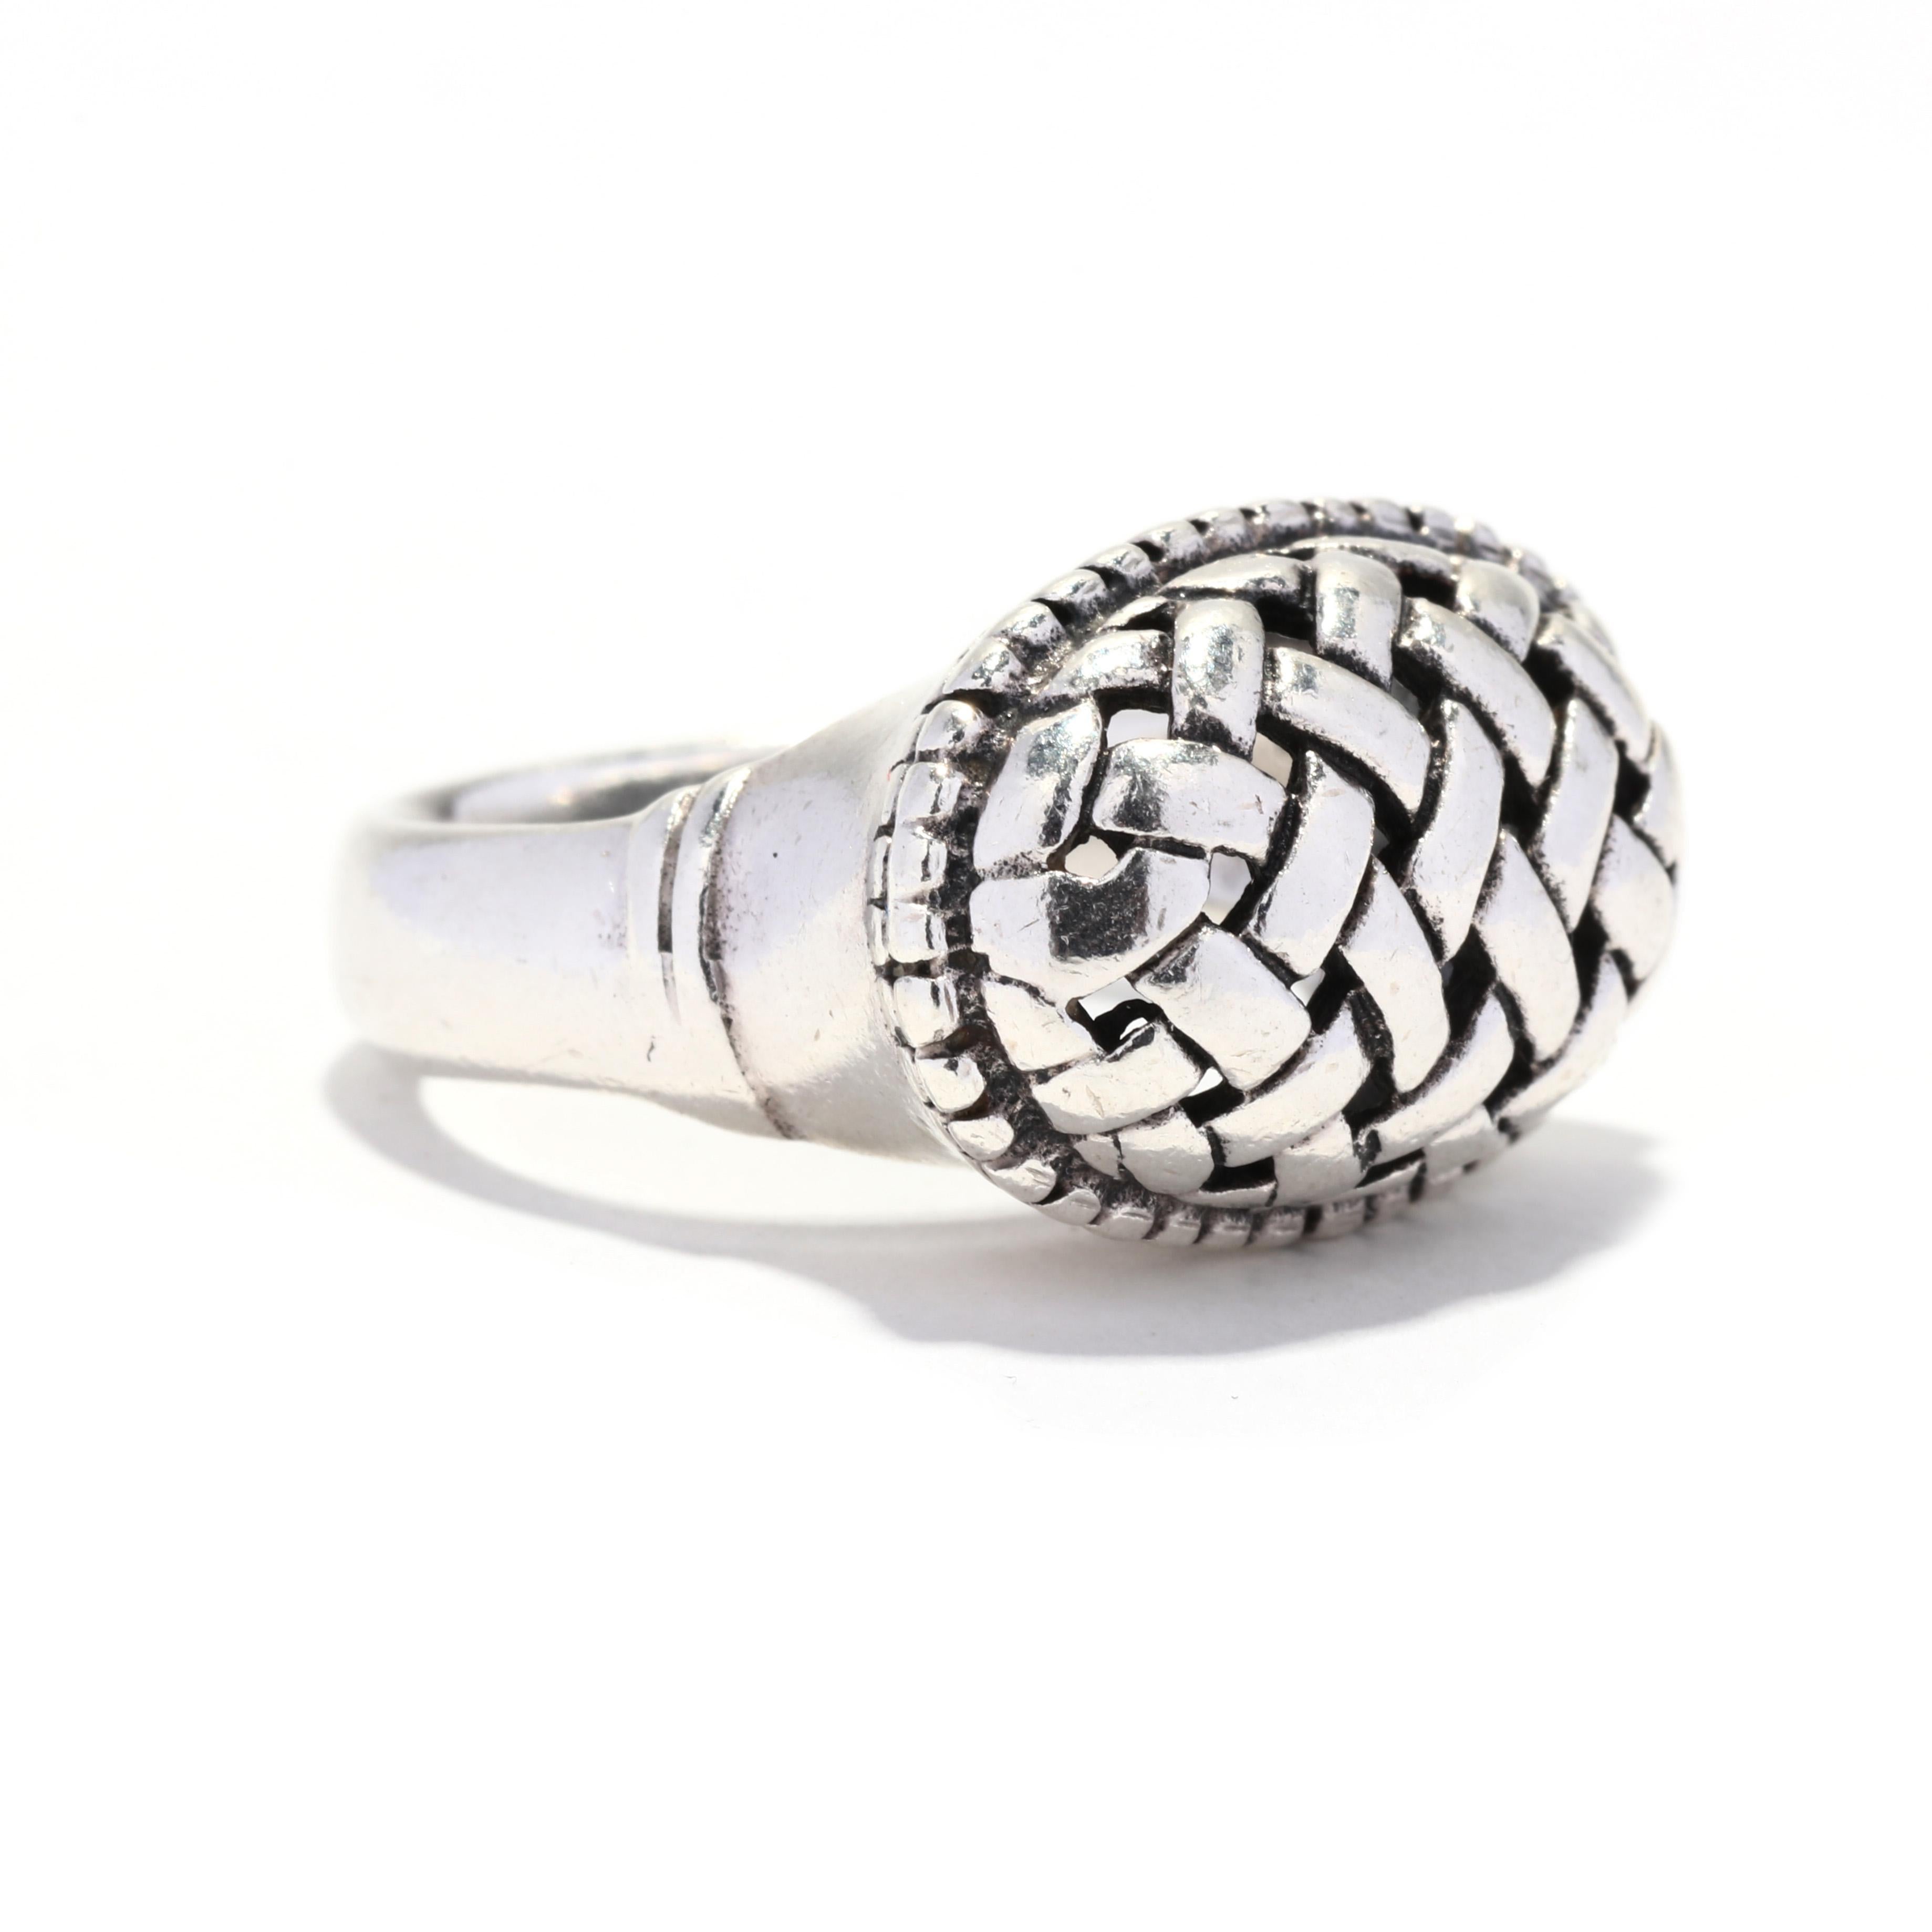 A vintage sterling silver basketweave dome ring. This ring features a large oval form with a woven, basketweave motif and a tapered band.

Ring Size 6.75

Rise Off Of Finger: 9 mm

Length: 14.7 mm

Weight: 5.6 dwts. / 8.8 grams

Stamped: 925

Ring